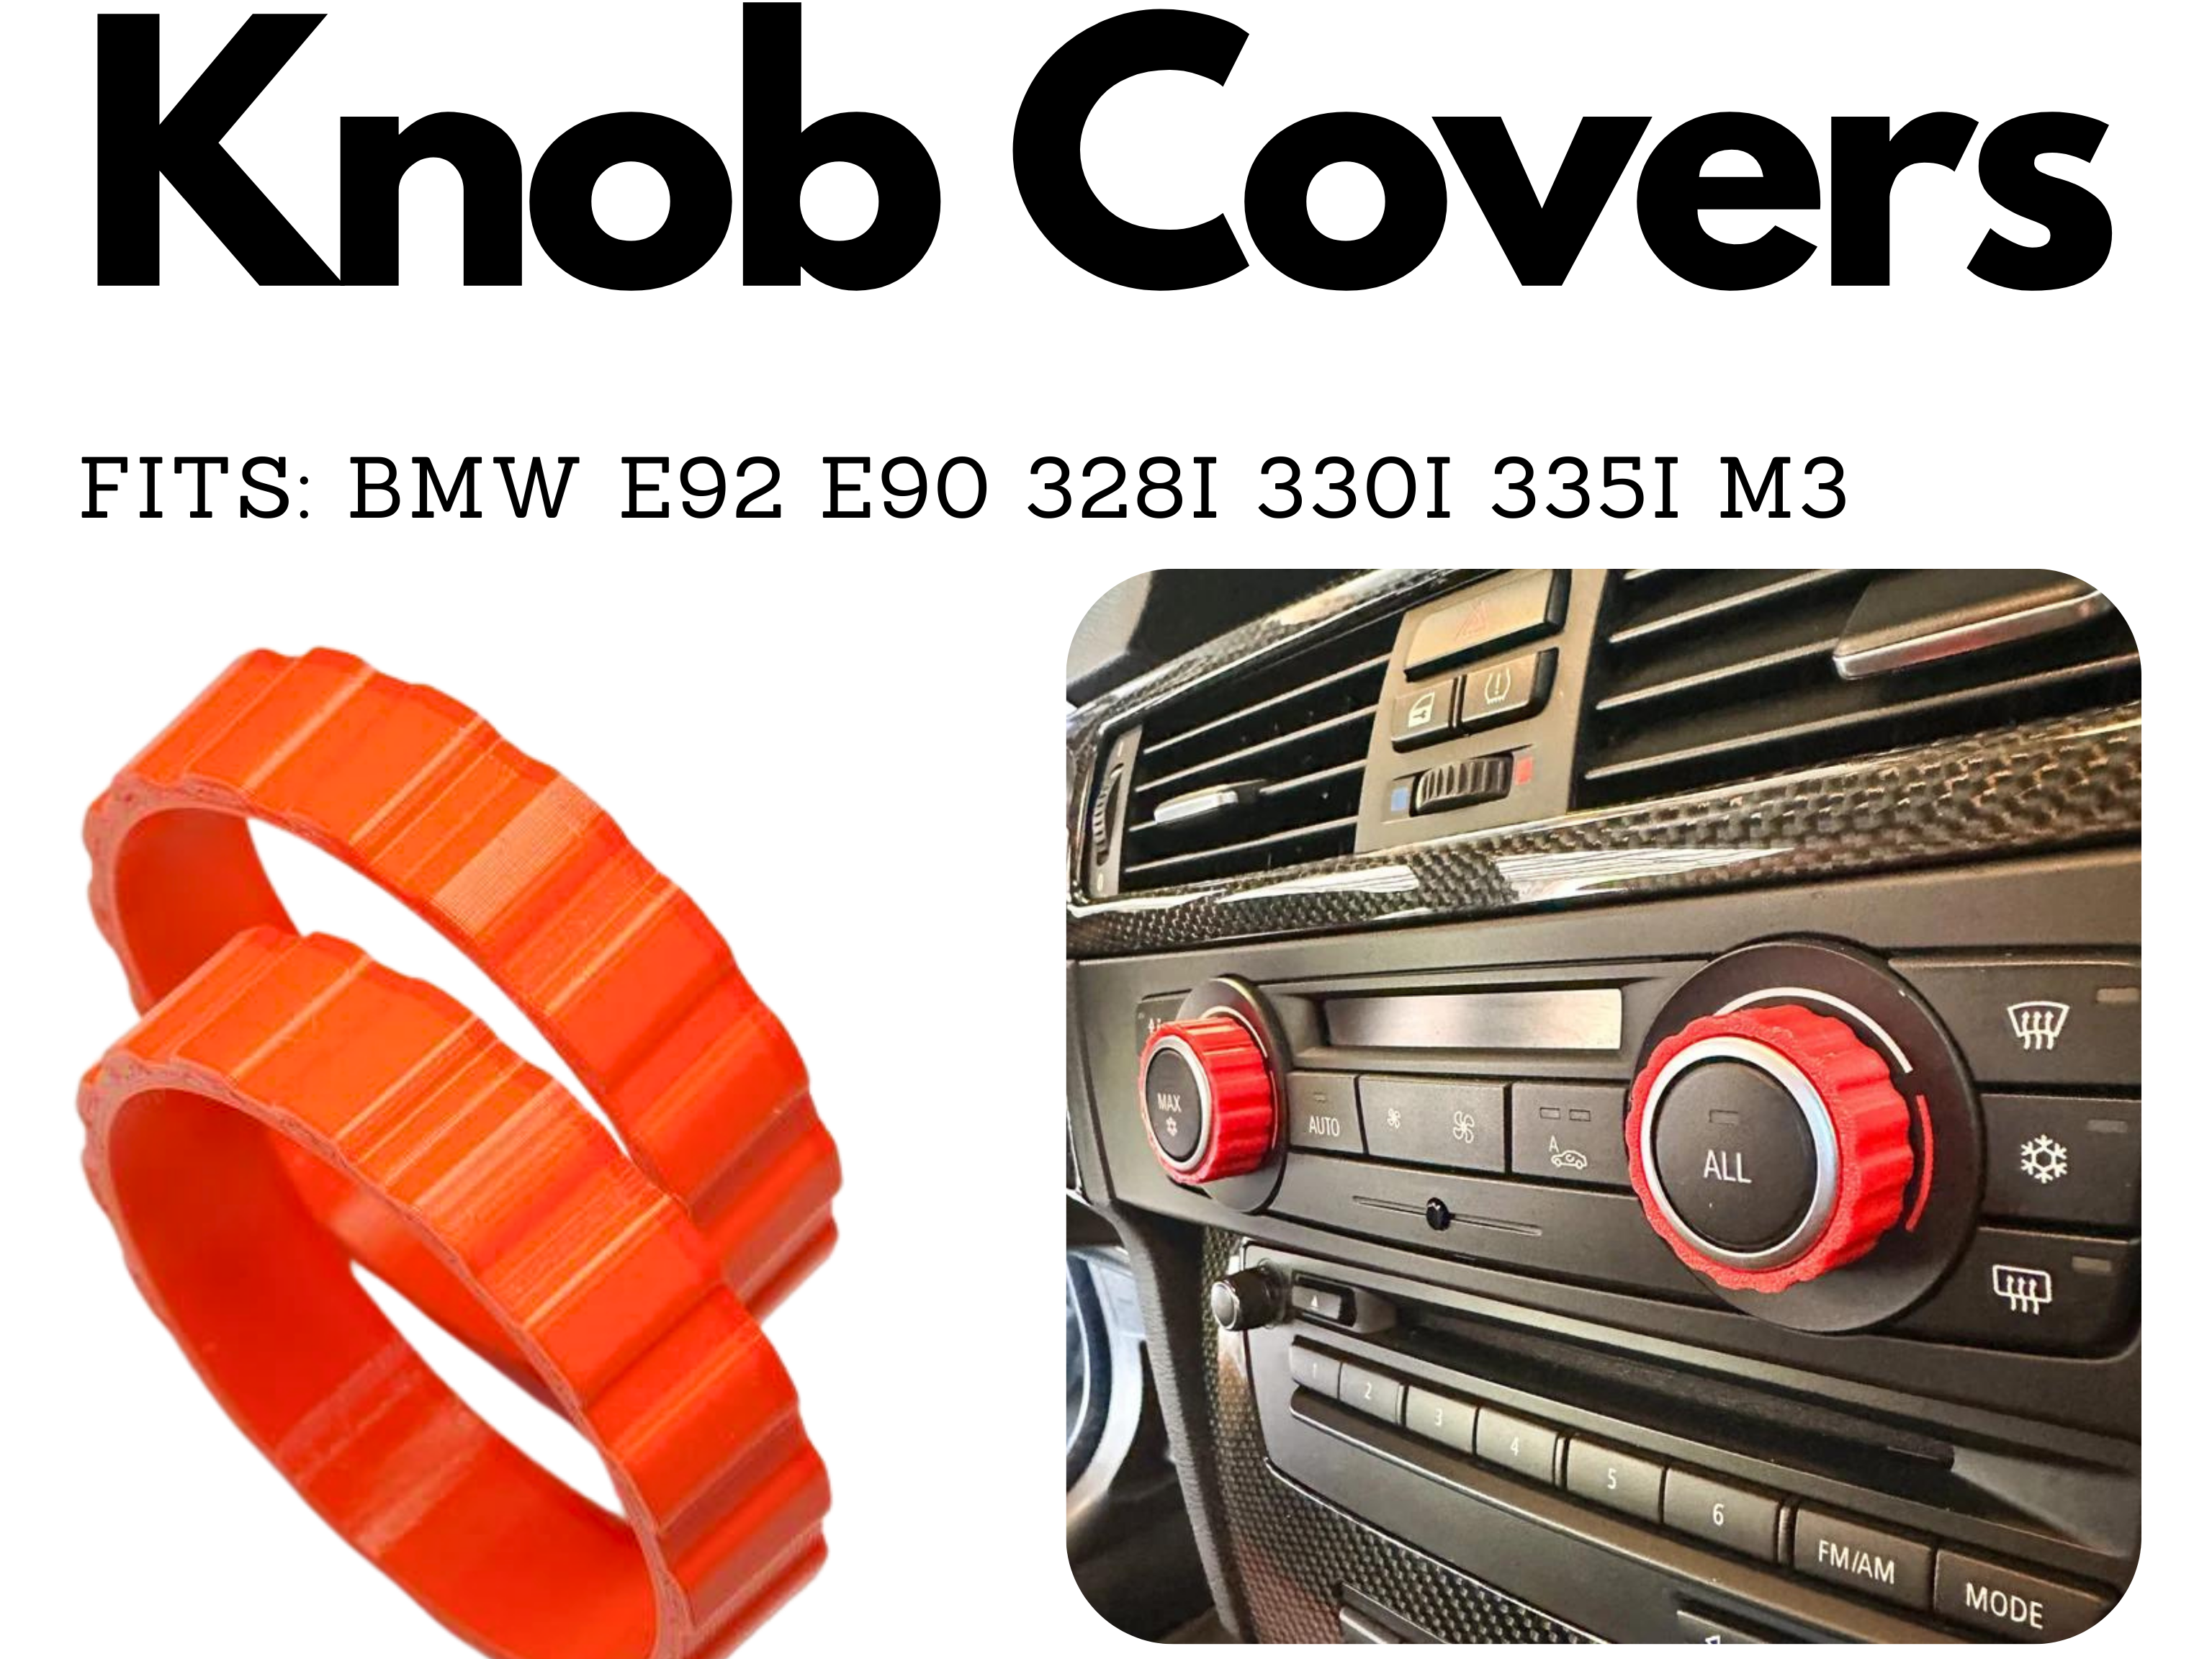 2 Knobs Set for BMW e92 e90 328i 330i 335i M3 AC knob covers - shielding your original knobs from scratches, scuffs, and daily wear and tear